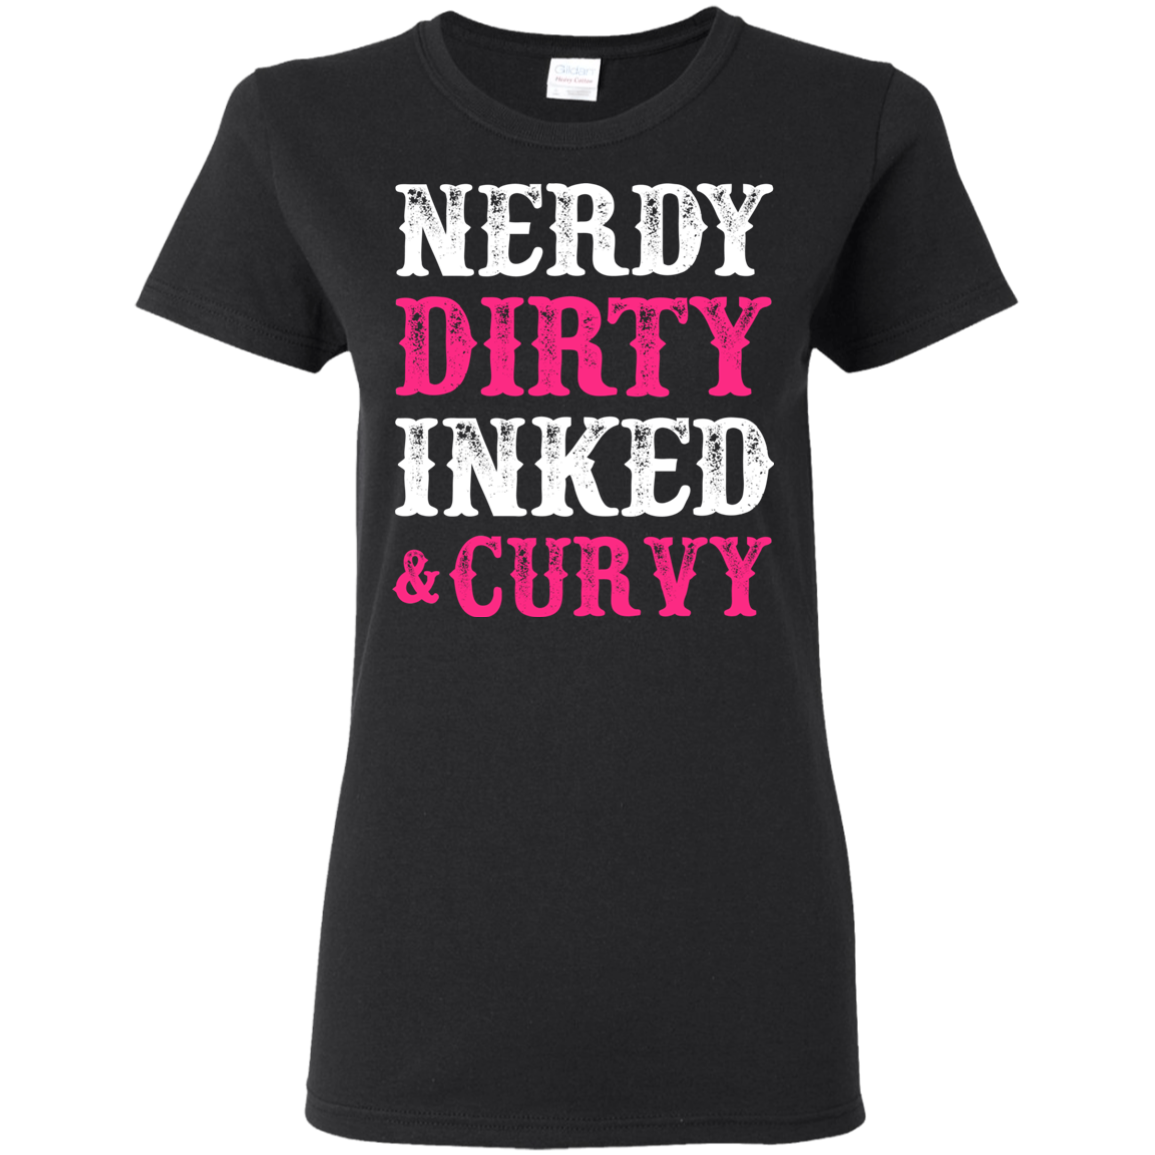 Nerdy dirty inked and curvy